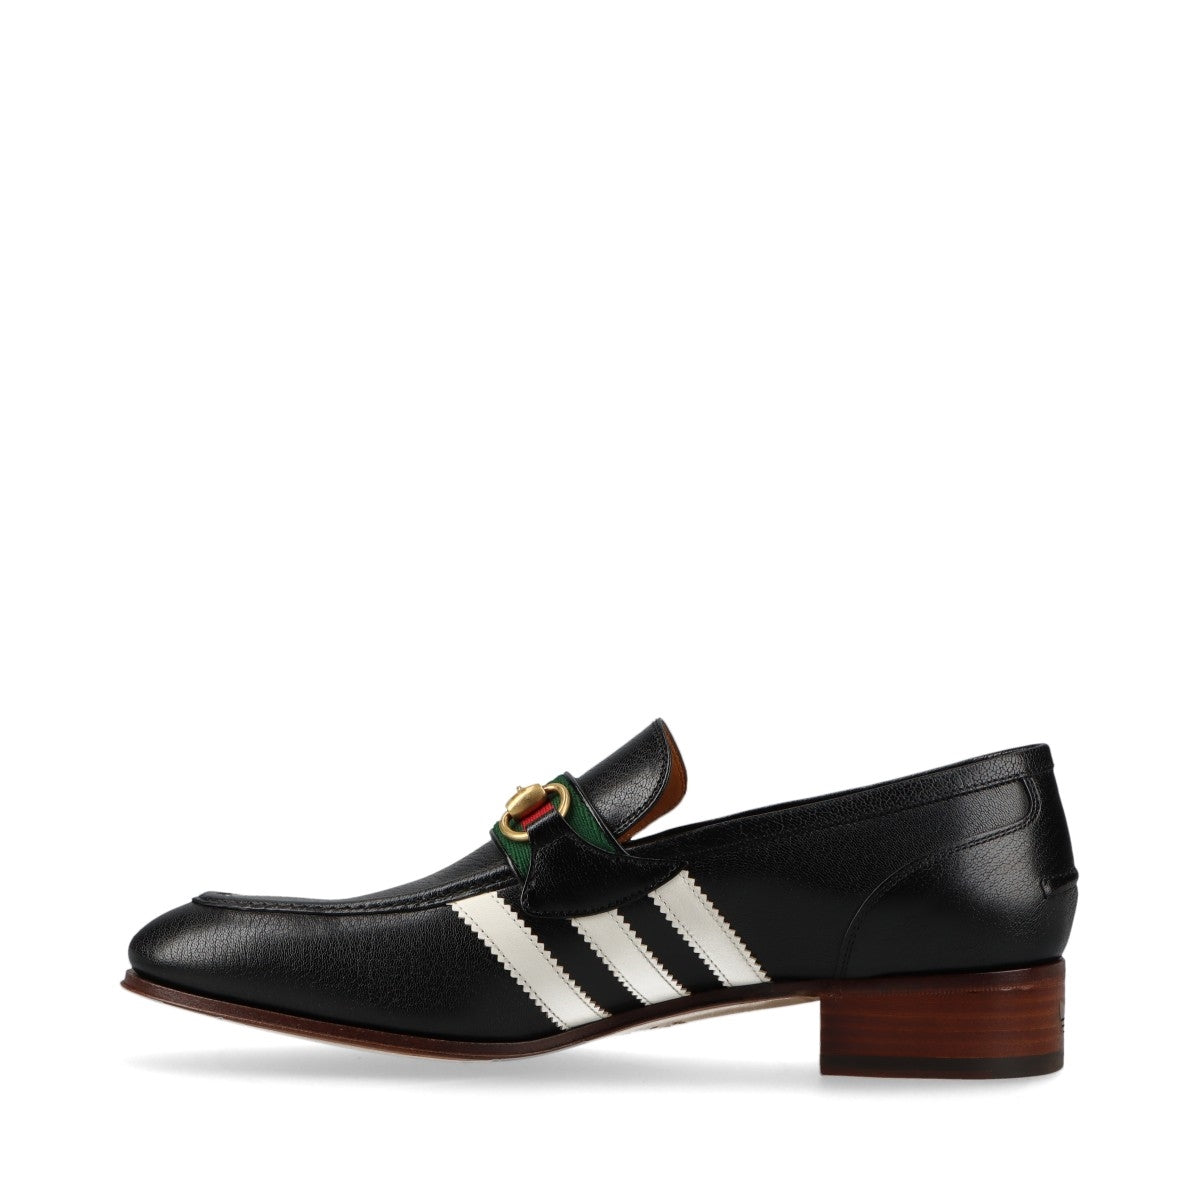 Gucci x adidas Horsebit Leather Loafer UA8 1/2 Men's Black 702283 Sherry Line box There is a bag